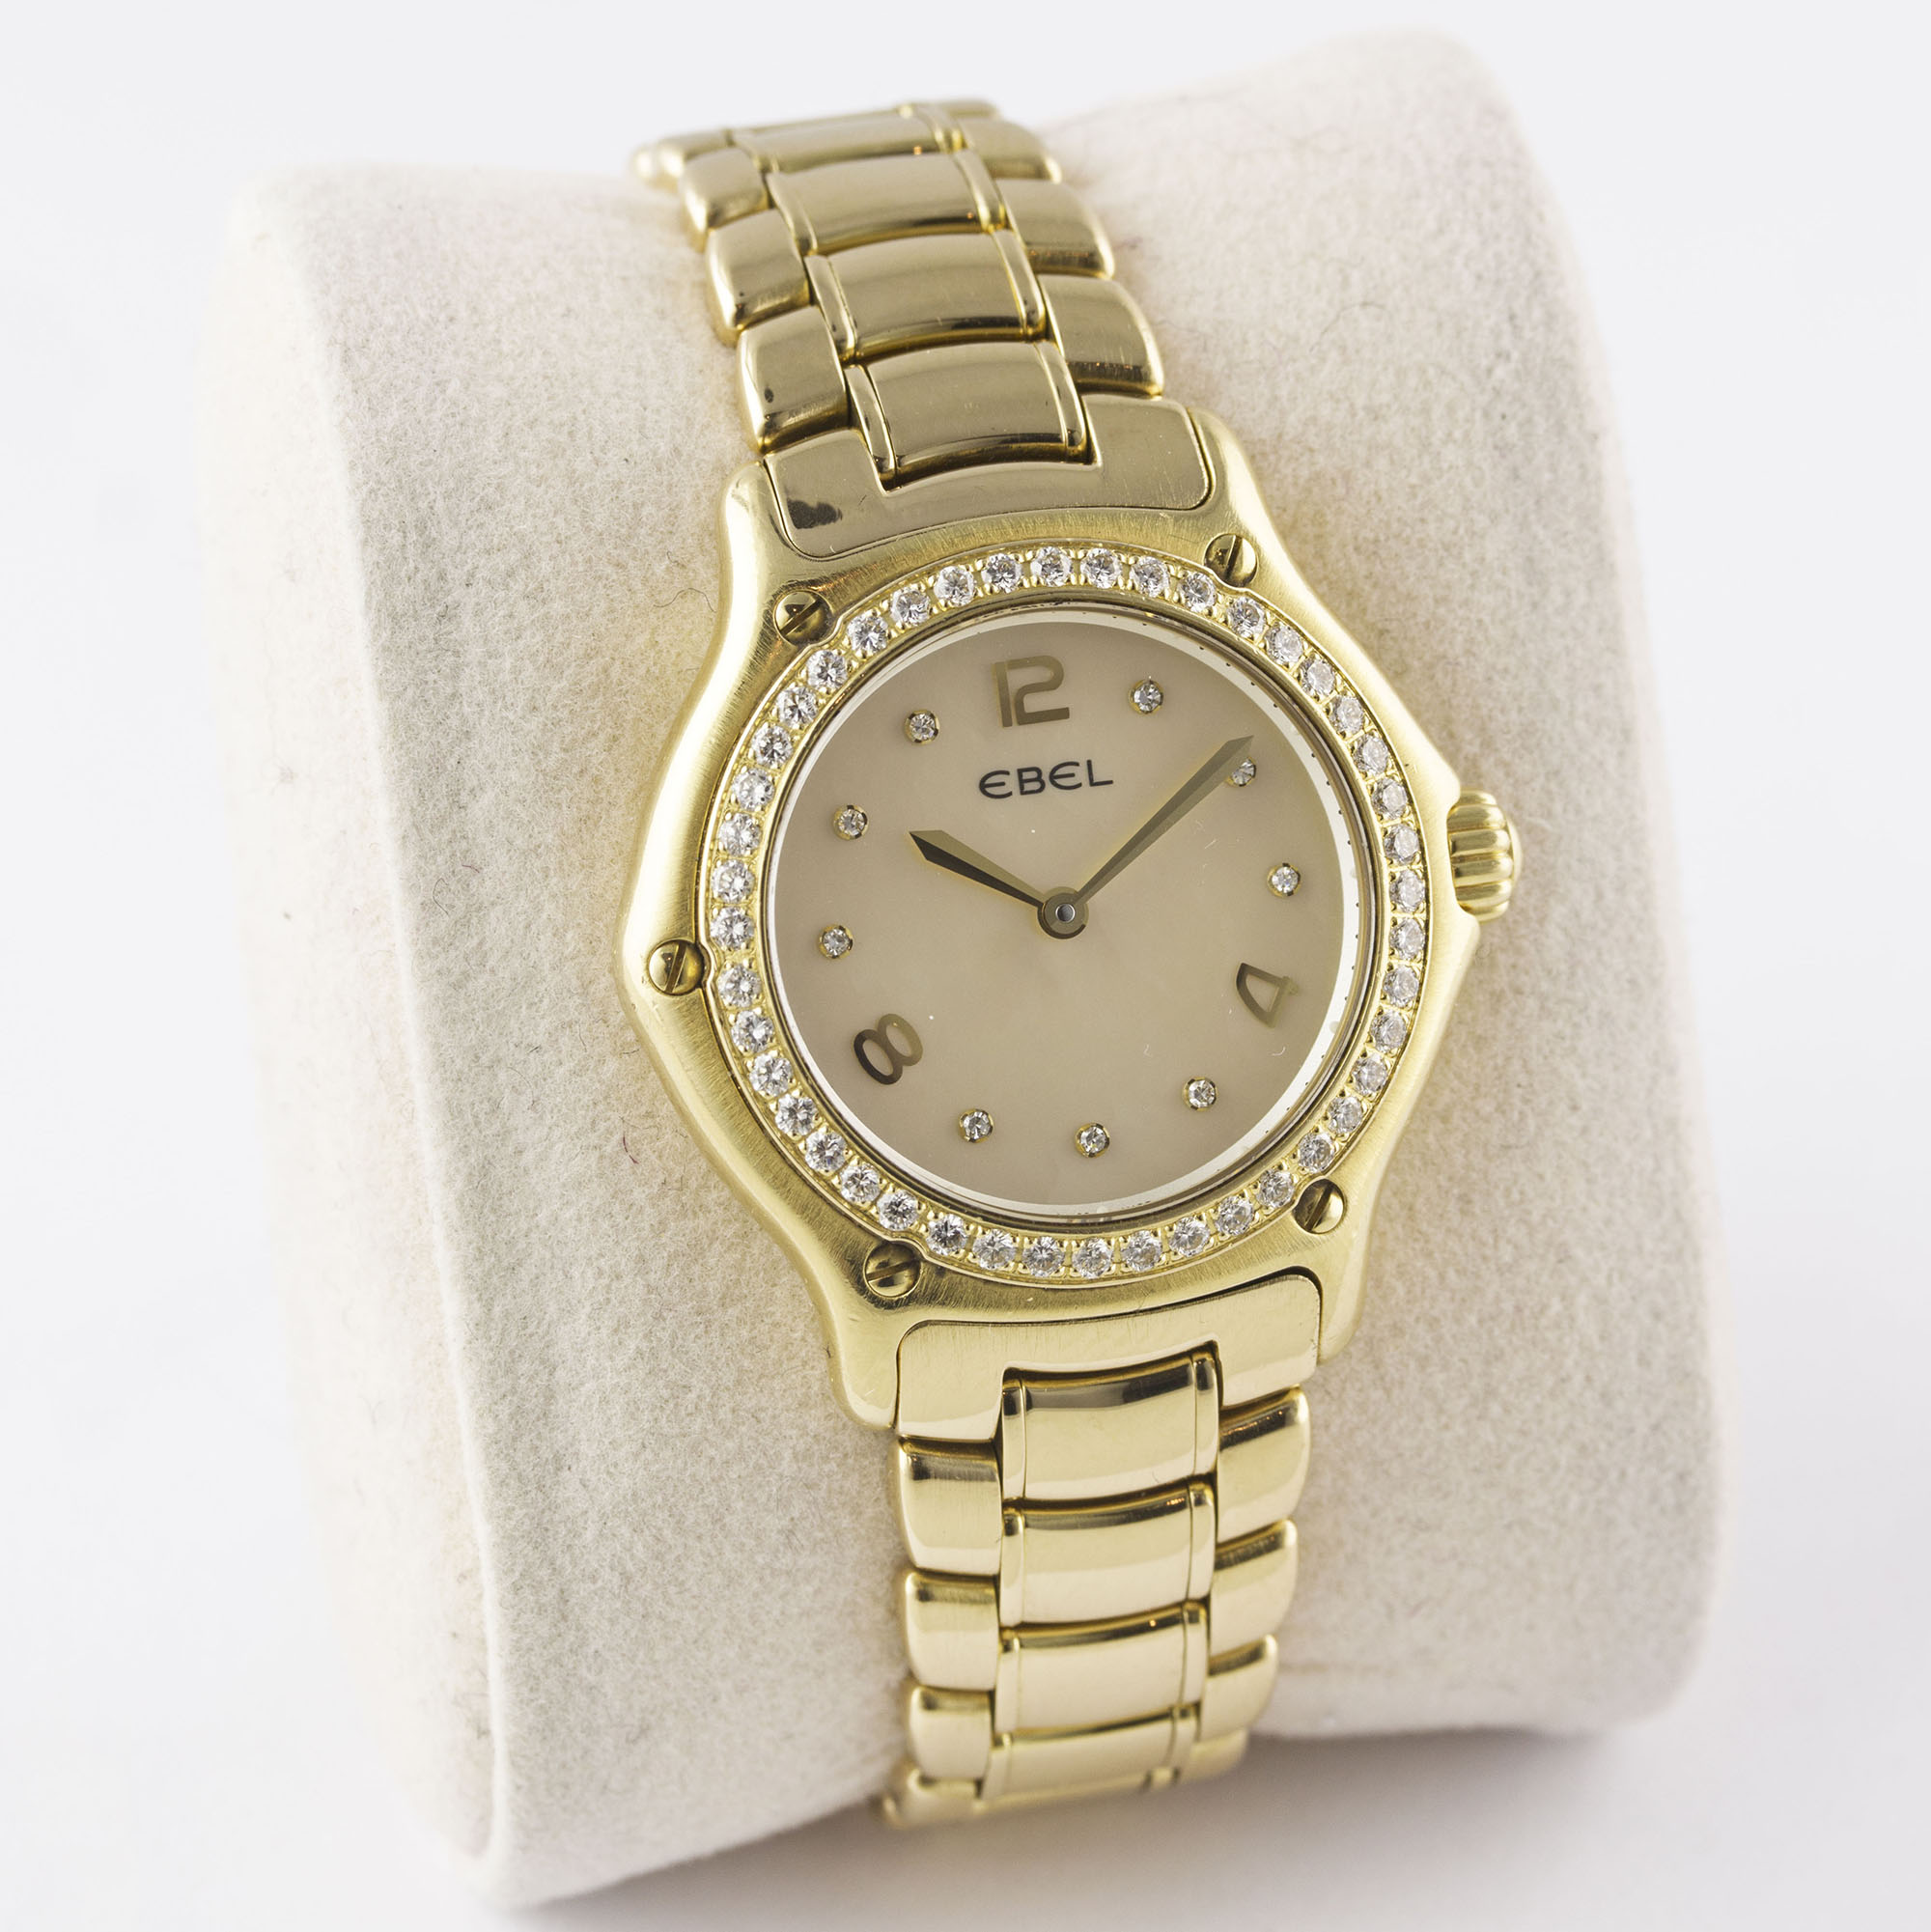 A LADIES 18K SOLID GOLD & DIAMOND EBEL 1911 BRACELET WATCH CIRCA 2000s, REF. E8090224 WITH - Image 4 of 8